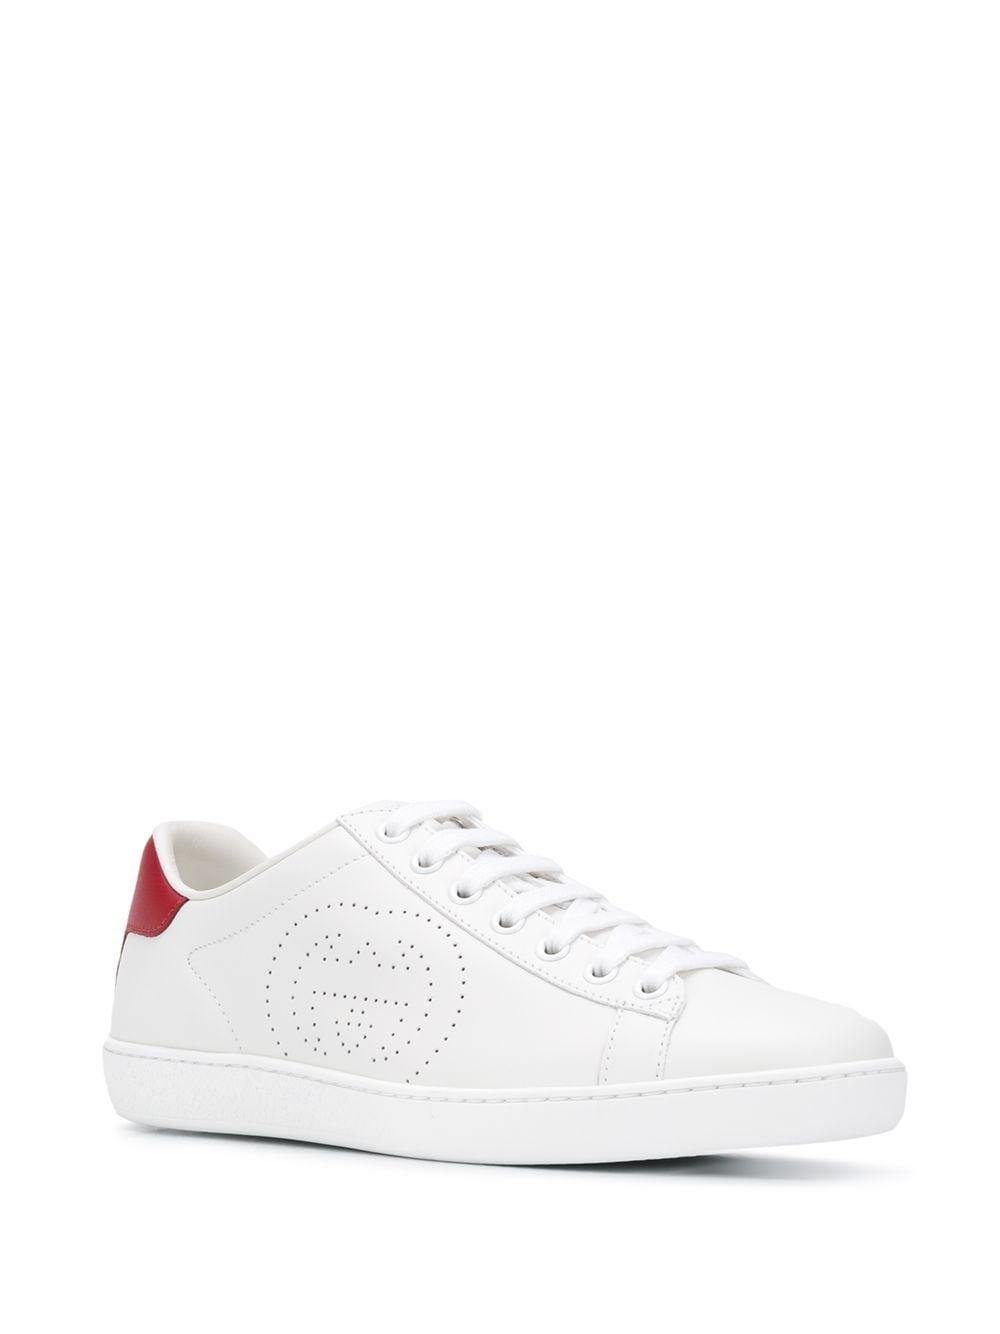 Gucci Leather Ace Interlocking G Sneakers in White - Lyst